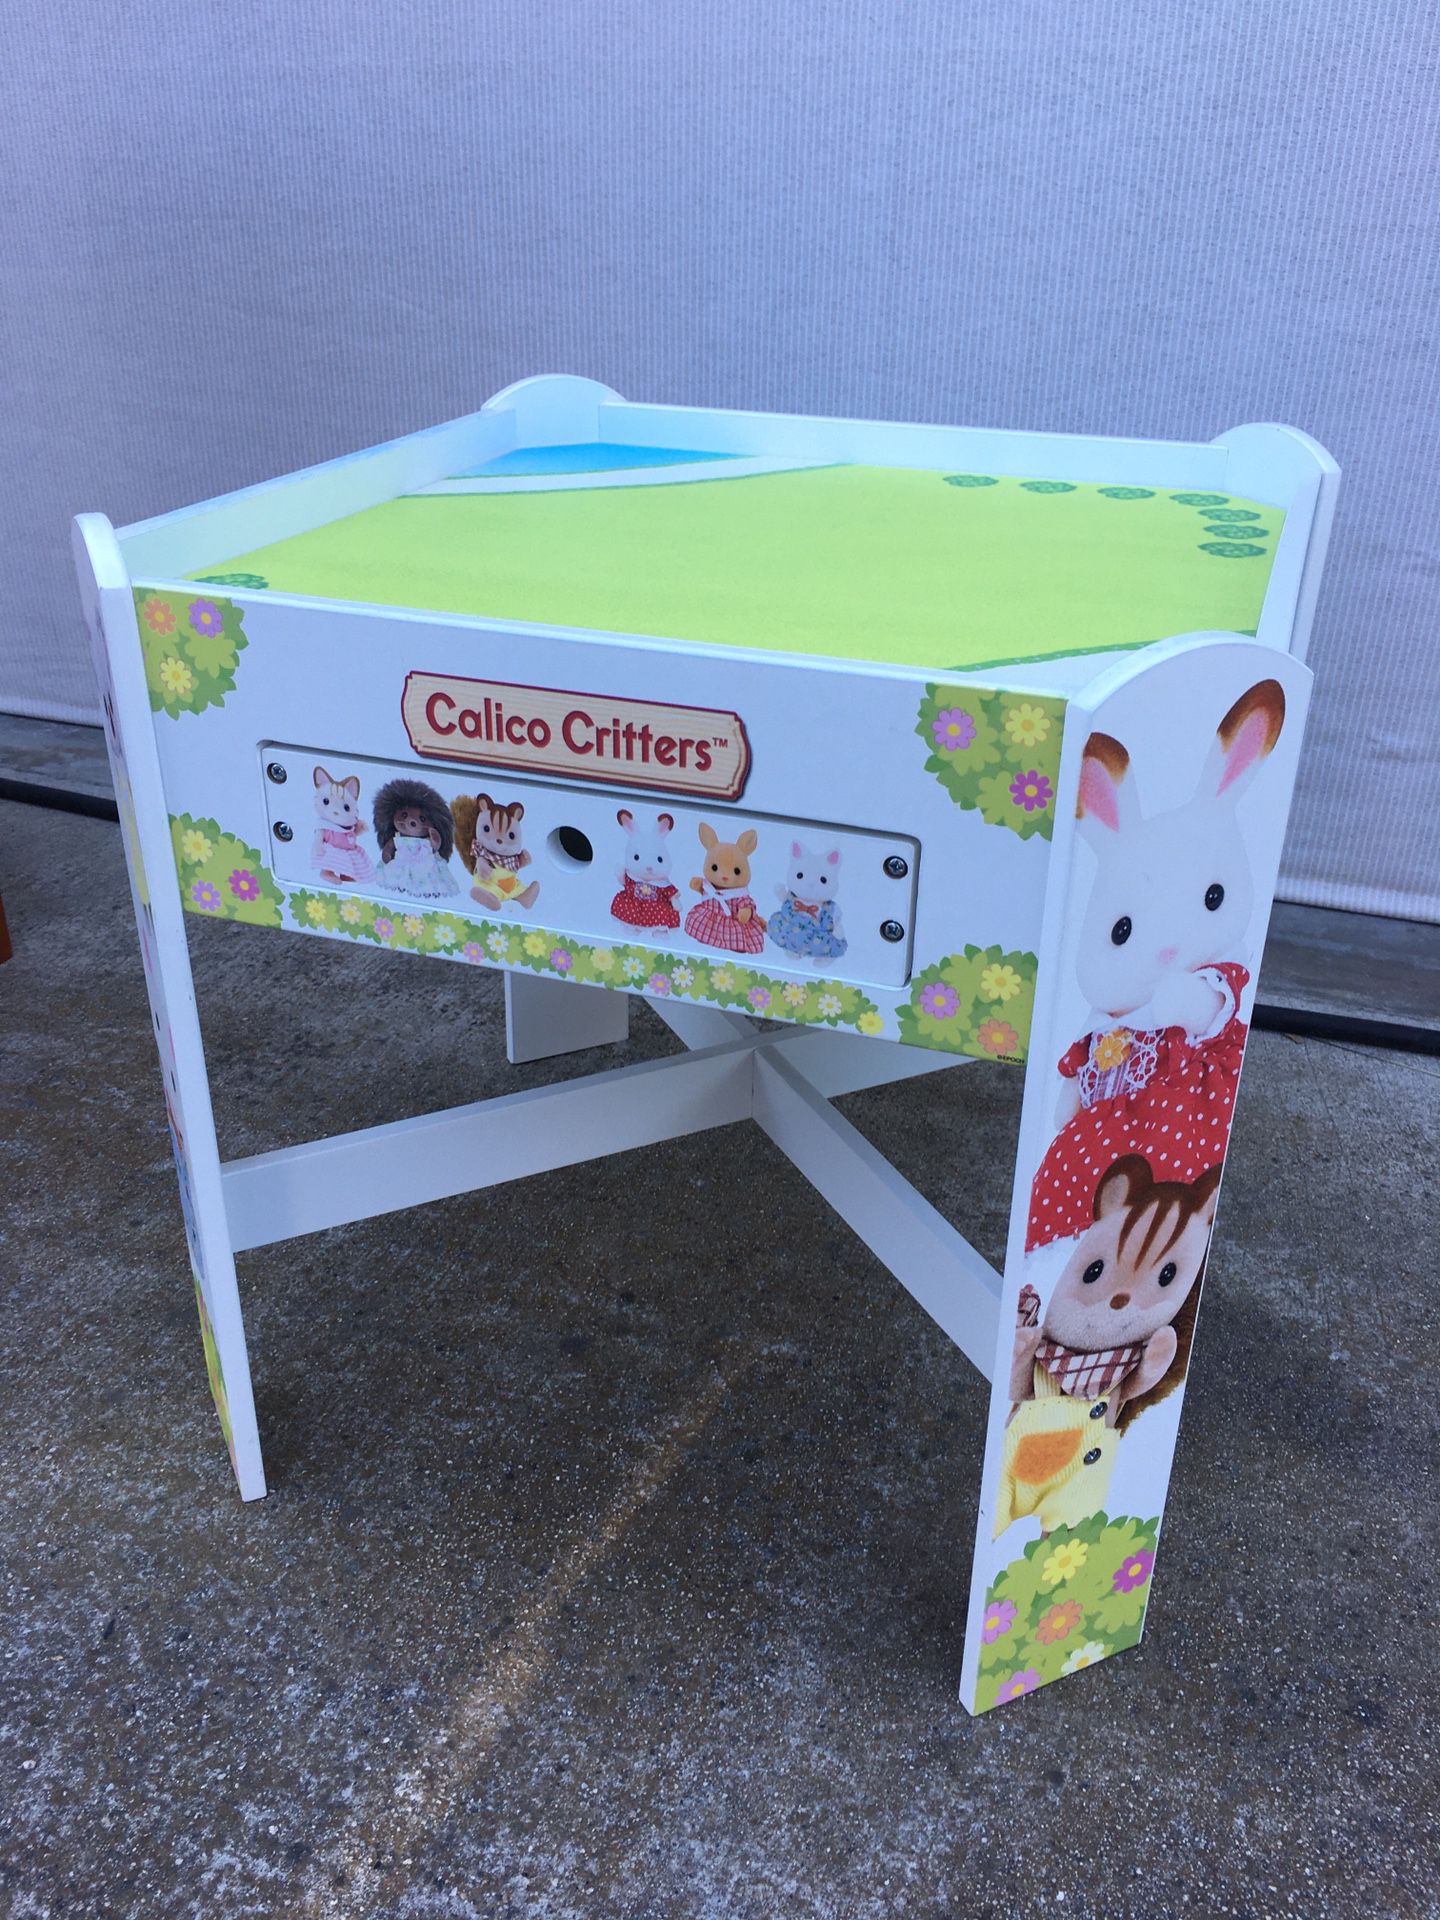 Calico Critters Playtable with storage drawer